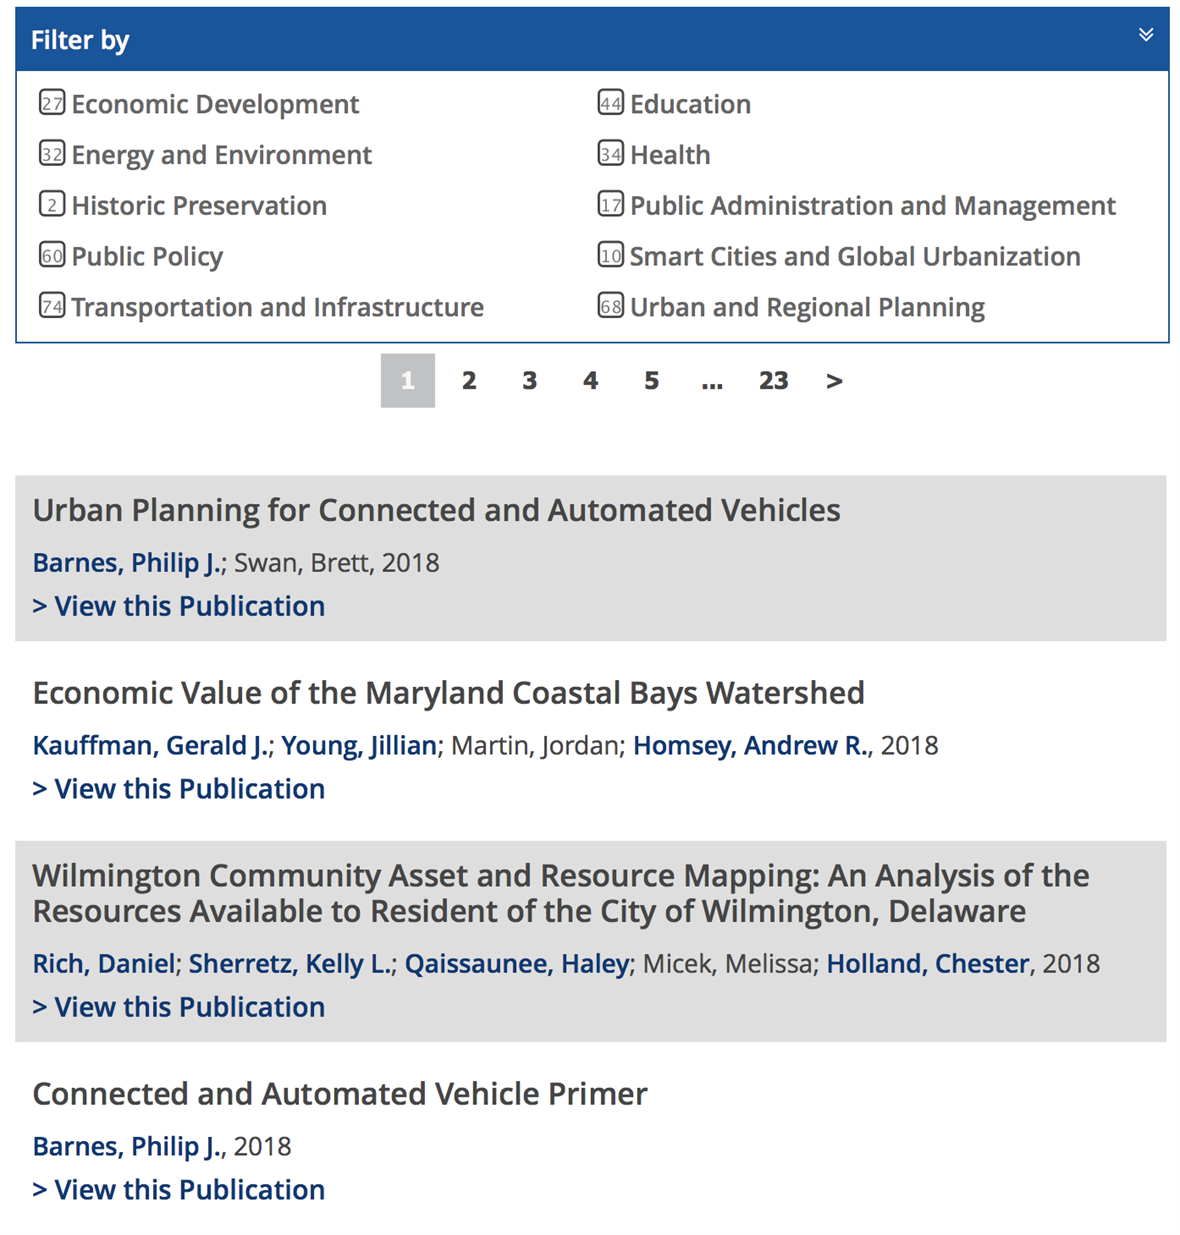 This screen capture of the IPA Publications Database showcases its toggle-activated filter feature as well as a list of current publications on the website.